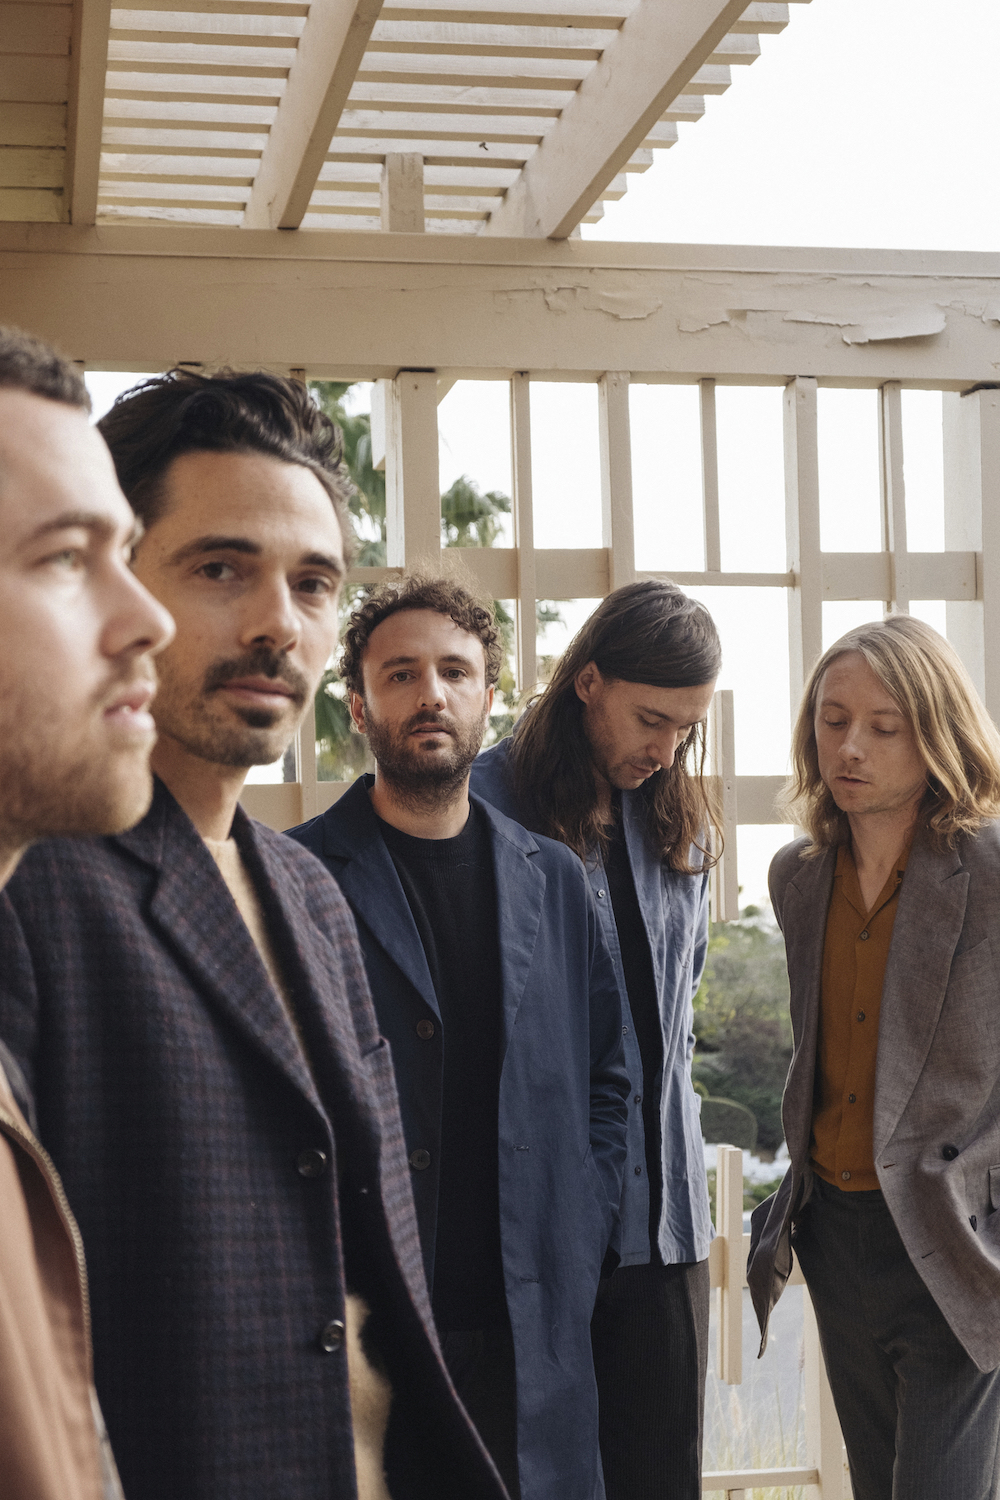 local natives in article3